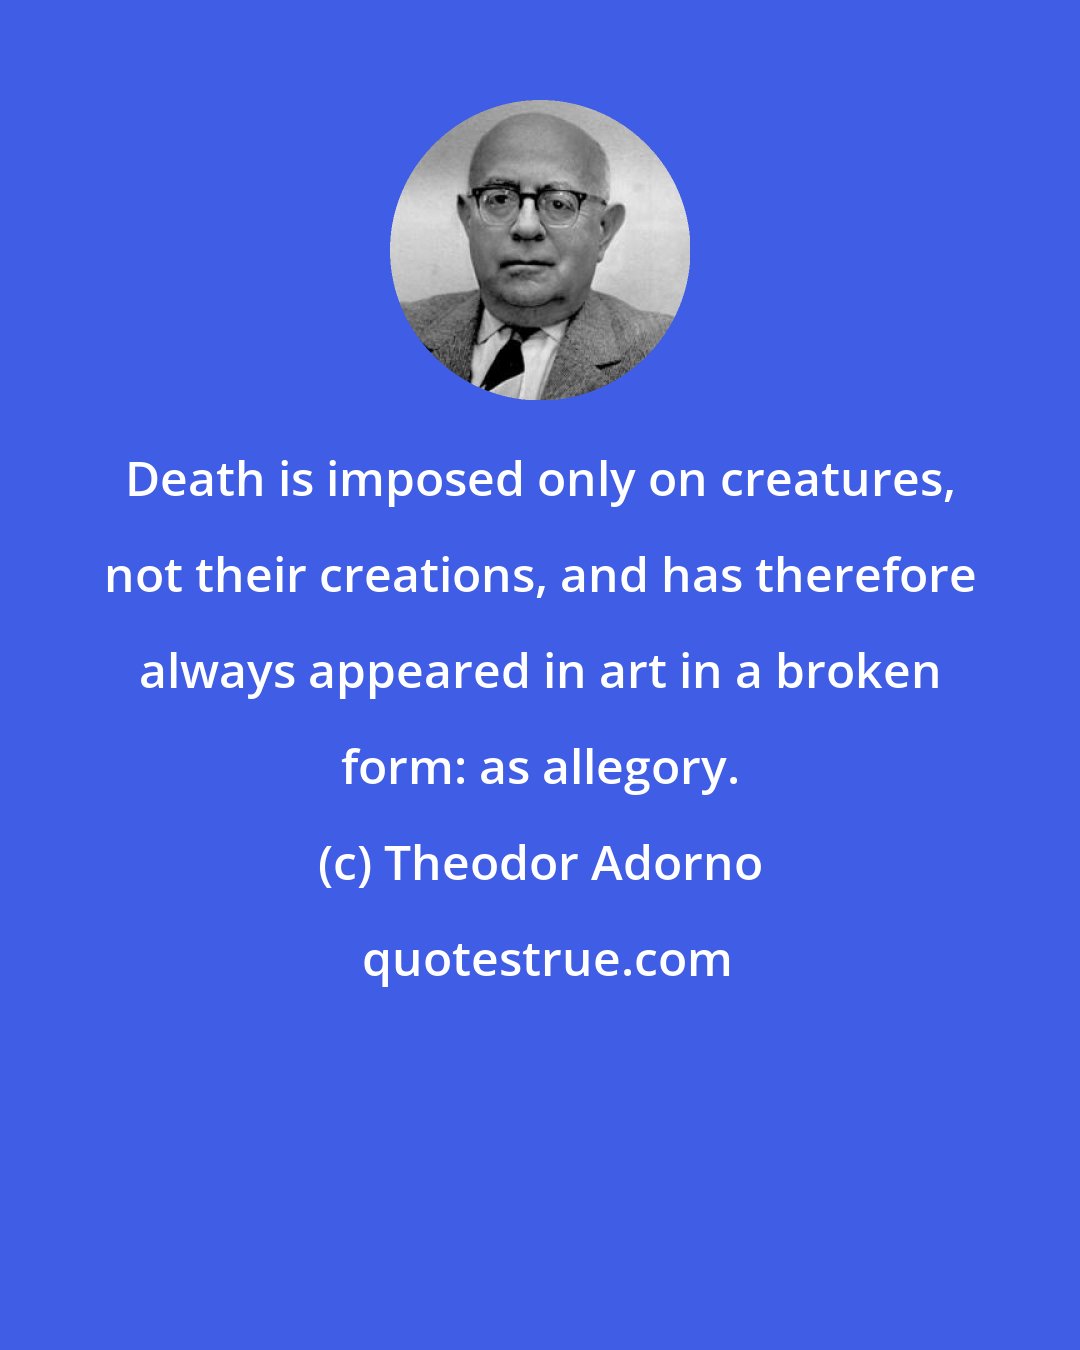 Theodor Adorno: Death is imposed only on creatures, not their creations, and has therefore always appeared in art in a broken form: as allegory.